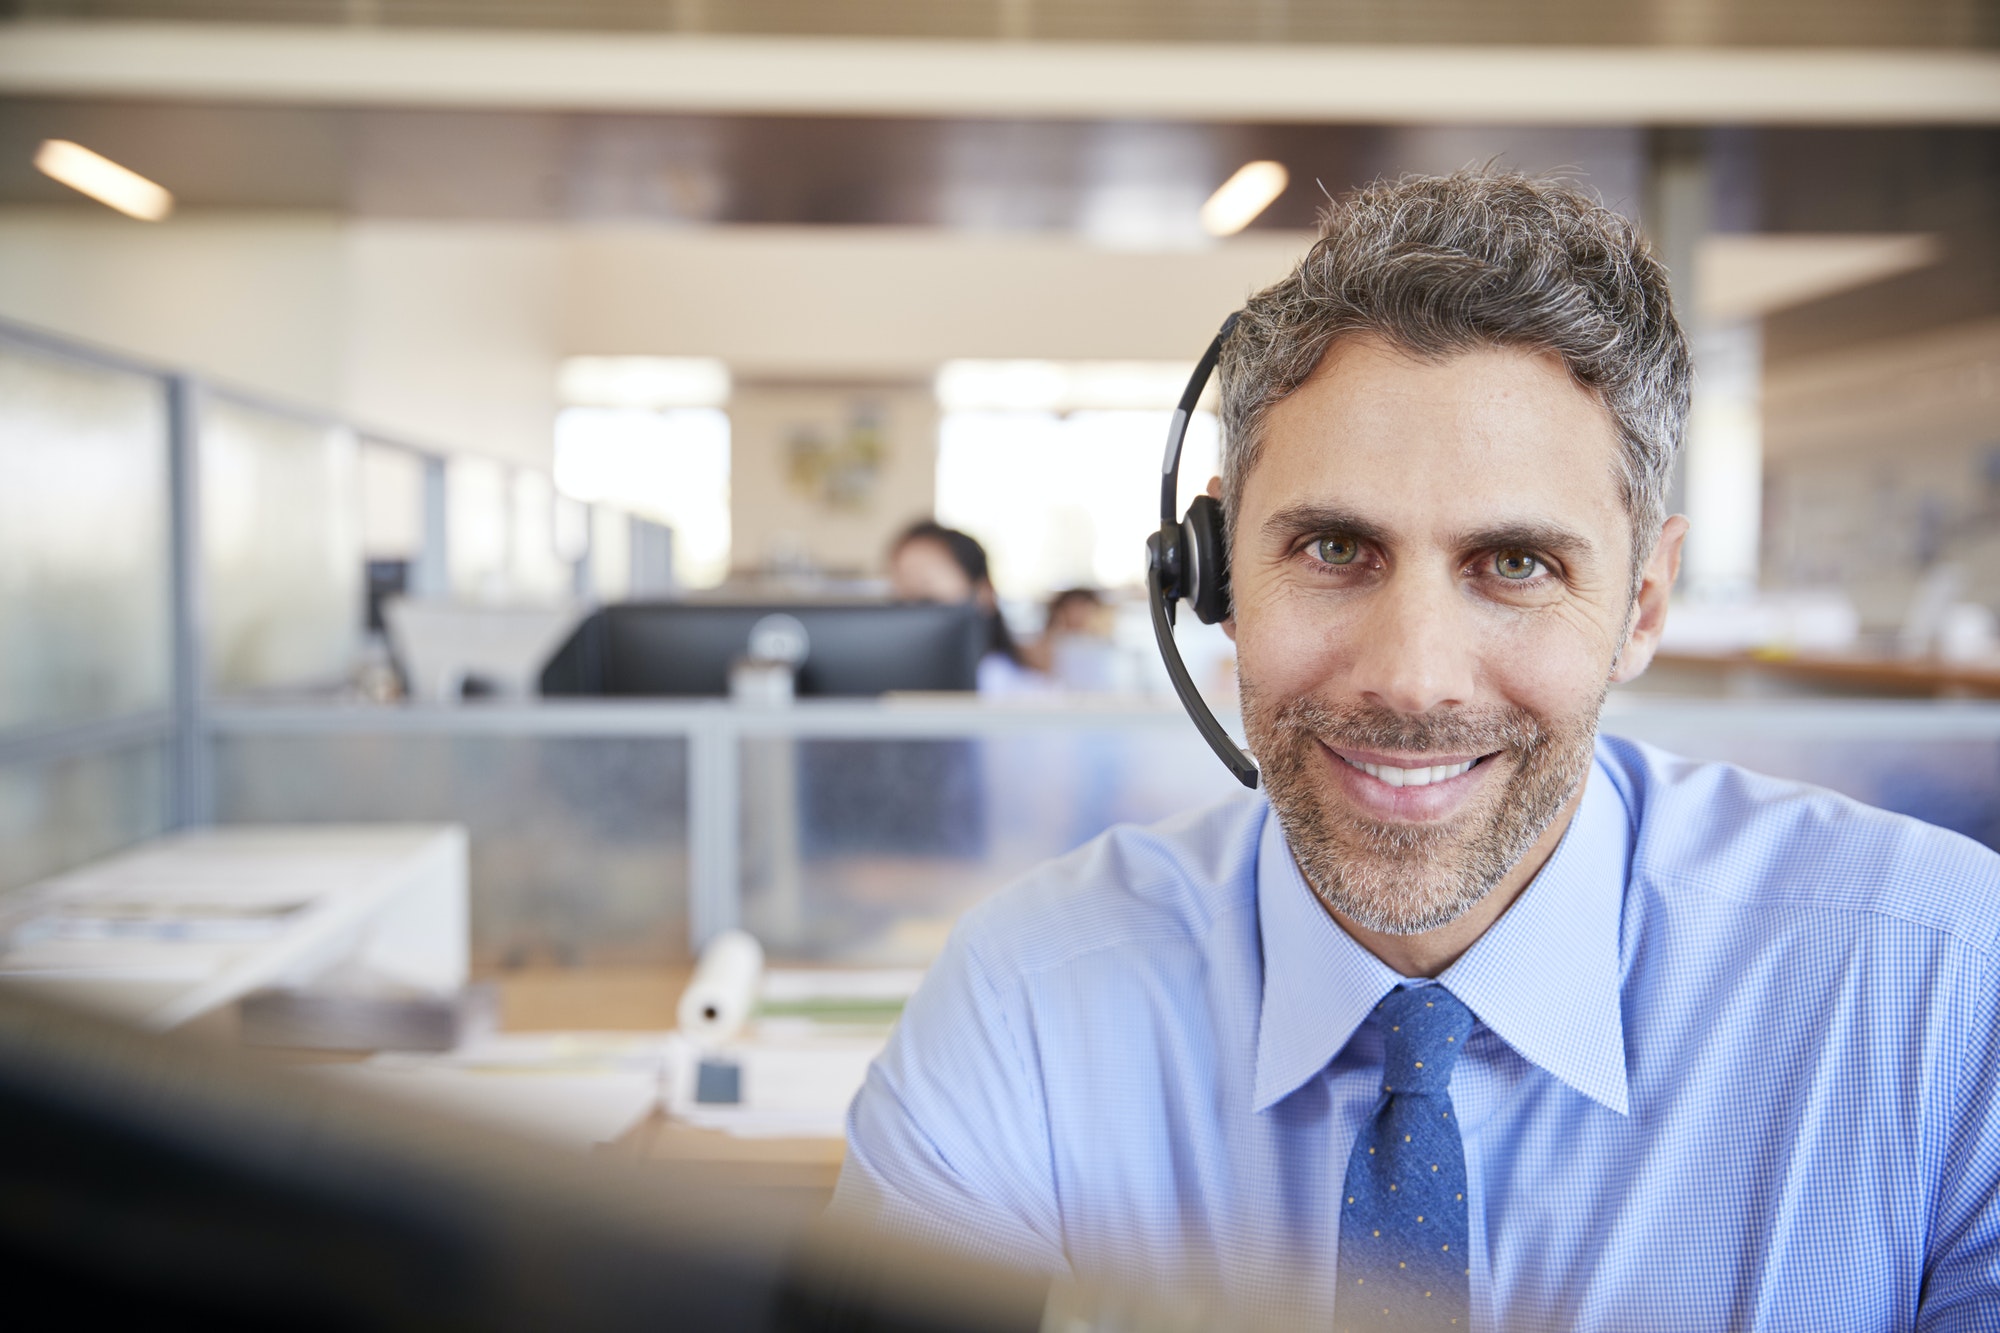 White male call centre worker smiling to camera